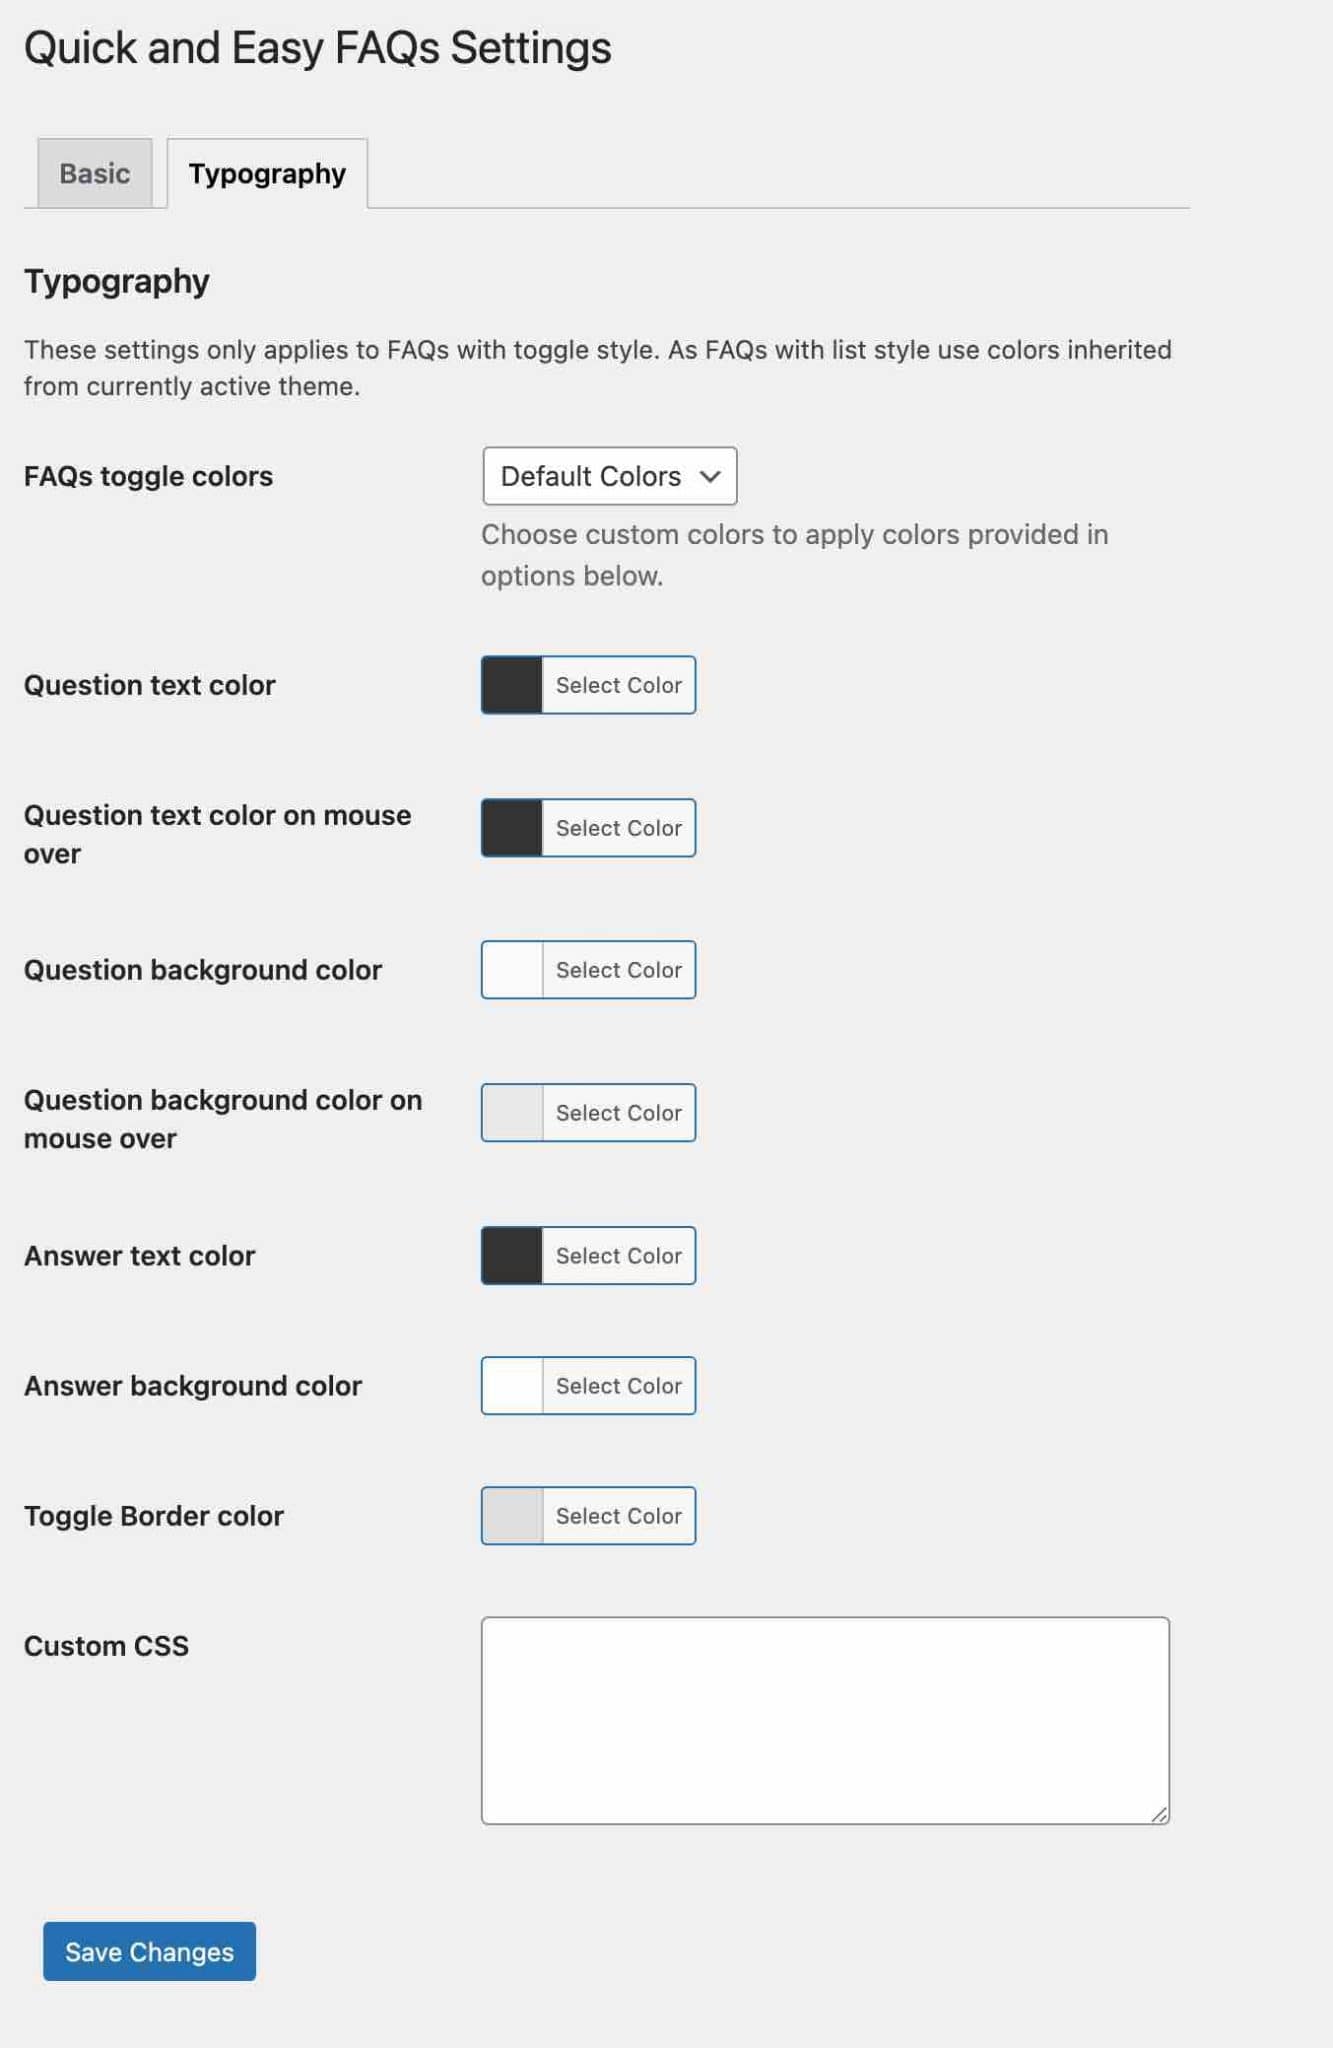 Quick and Easy FAQs plugin settings.